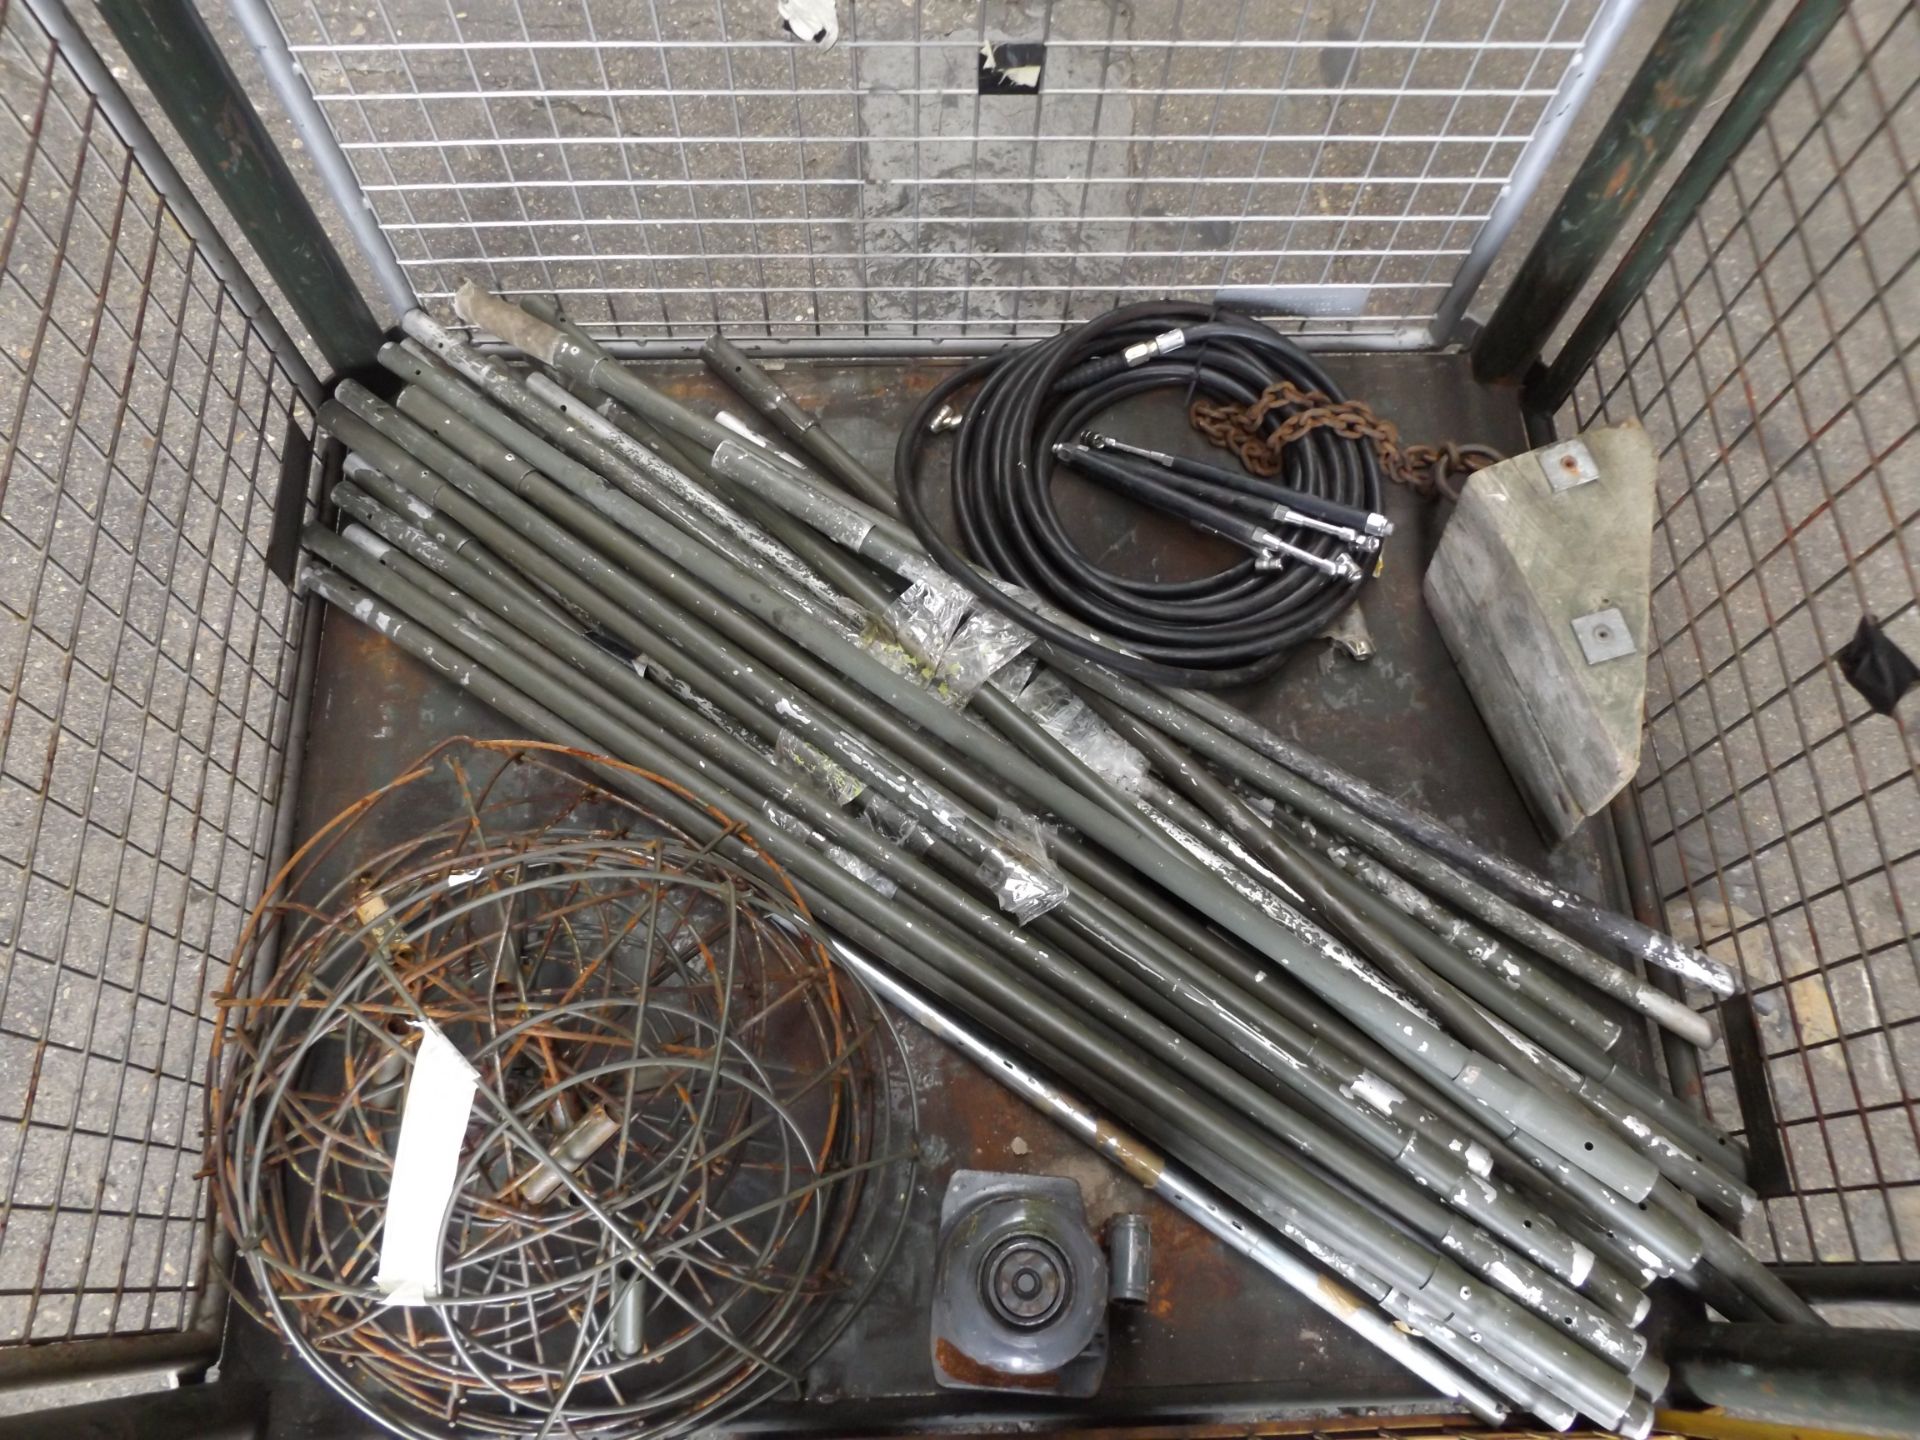 Mixed Stillage of Camo Net Support Kit, 10t Jack and Airline